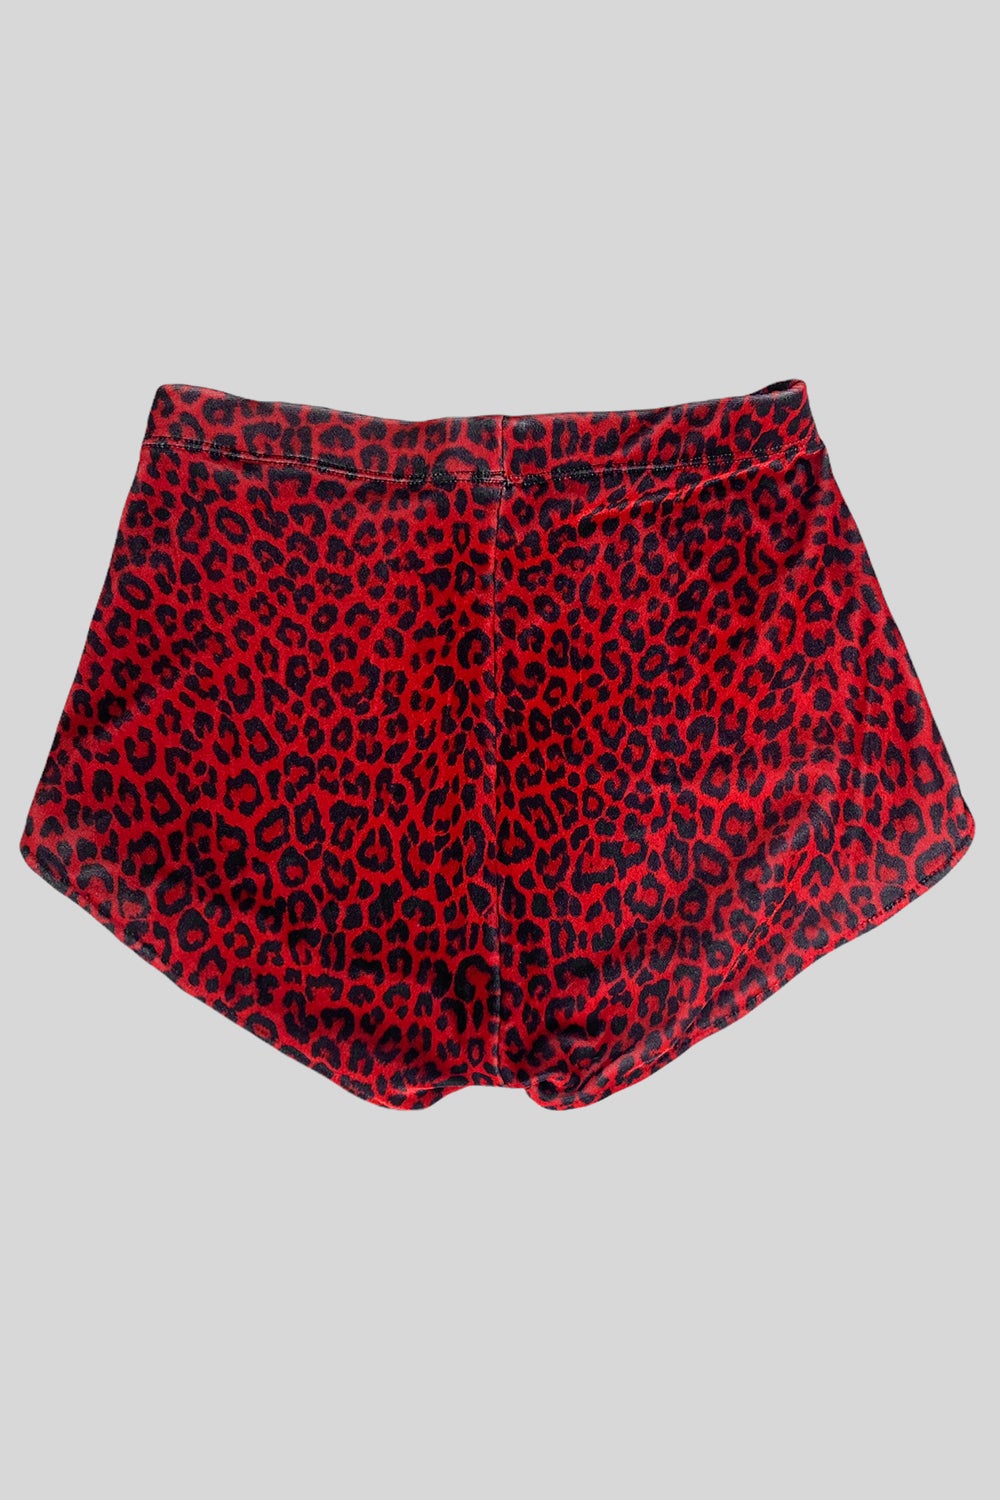 Red Leopard Hot Shorts | M In Stock